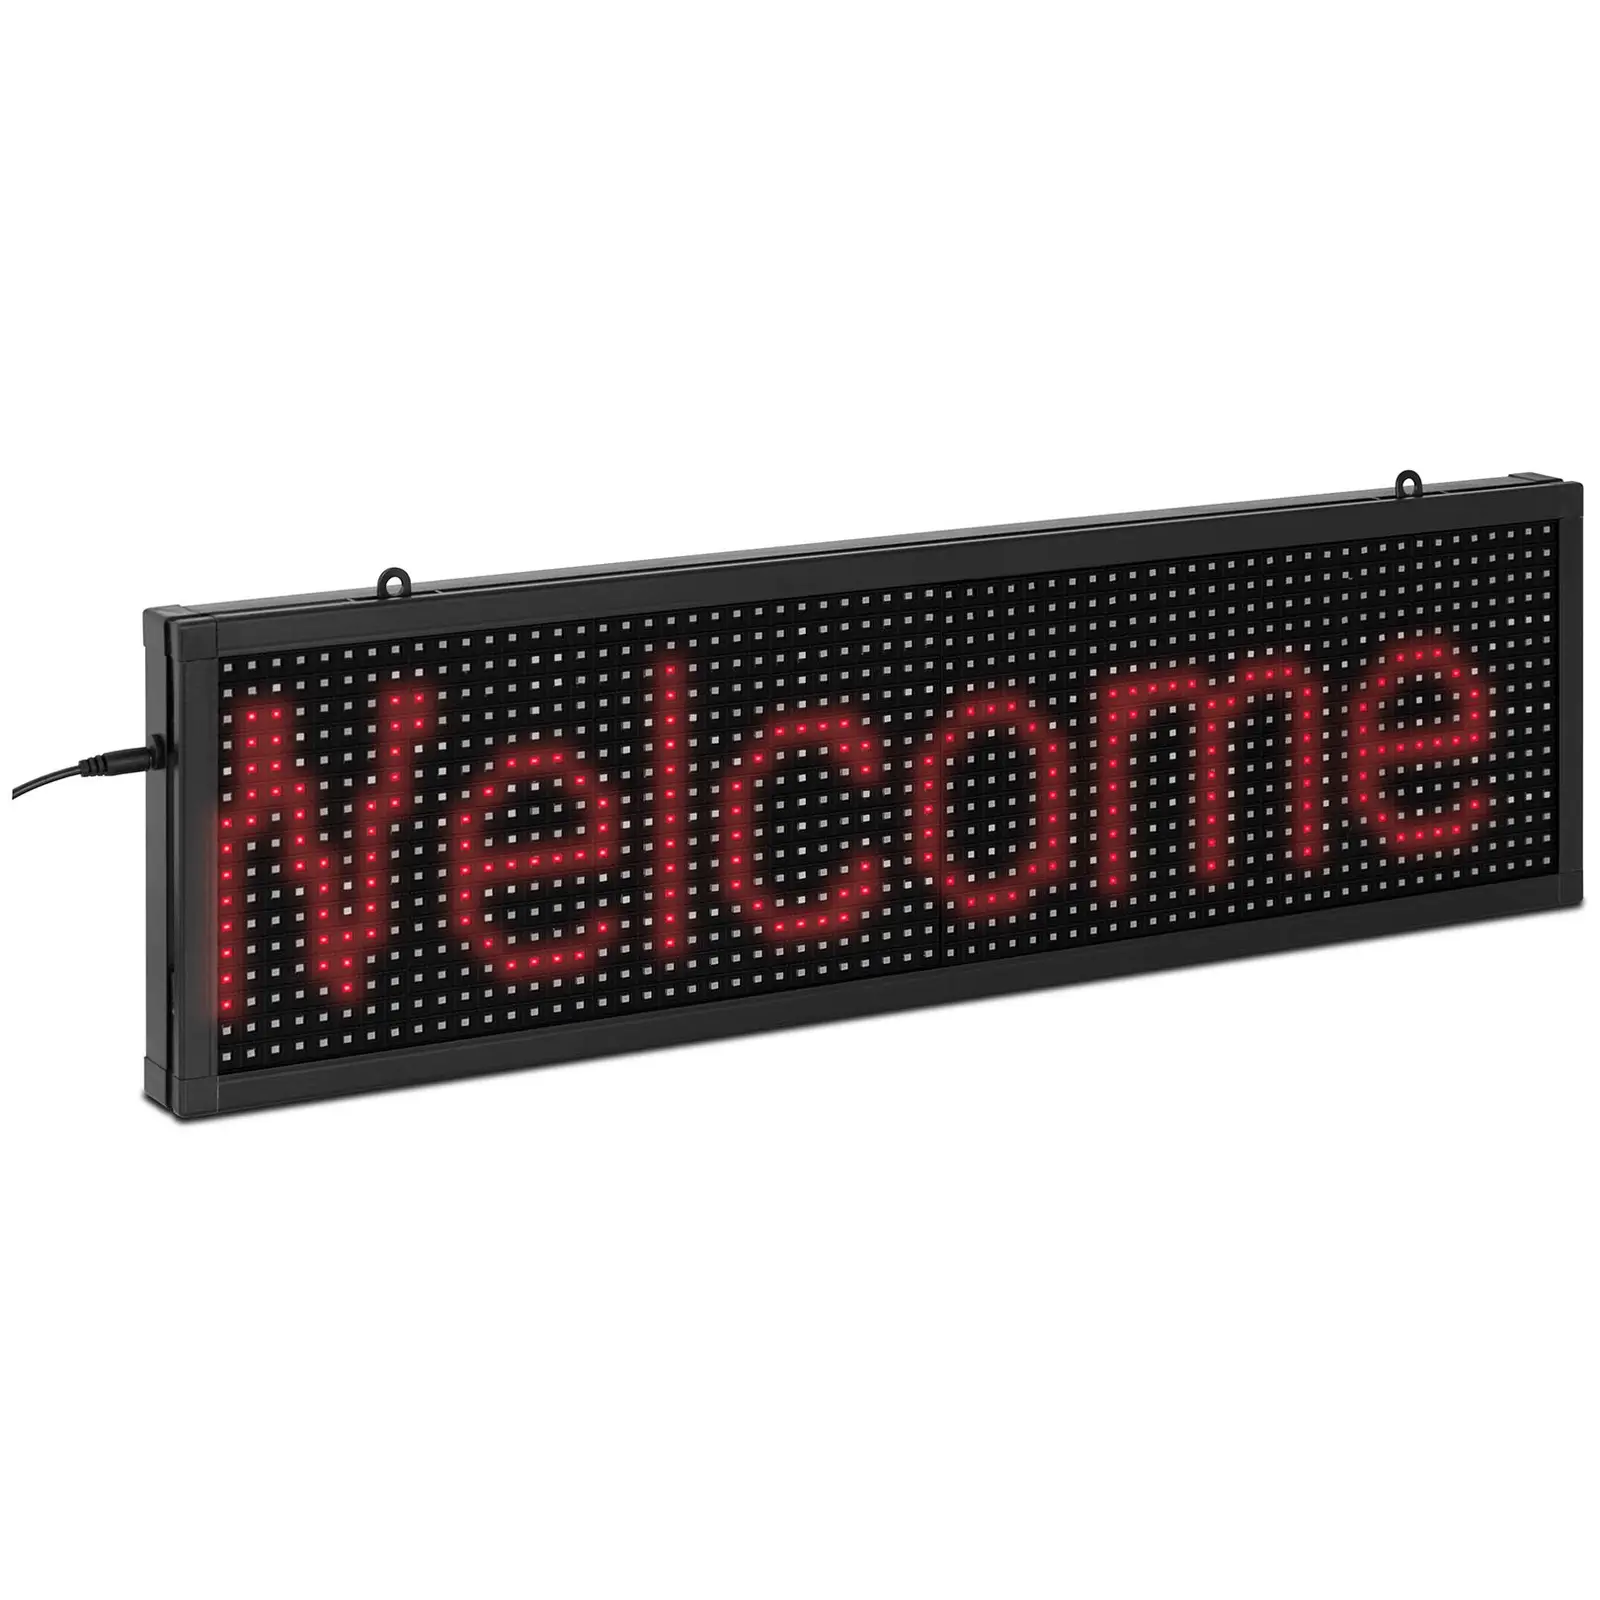 LED-Laufschrift - 64 x 16 rote LED - 67 x 19 cm - programmierbar via iOS / Android - 0